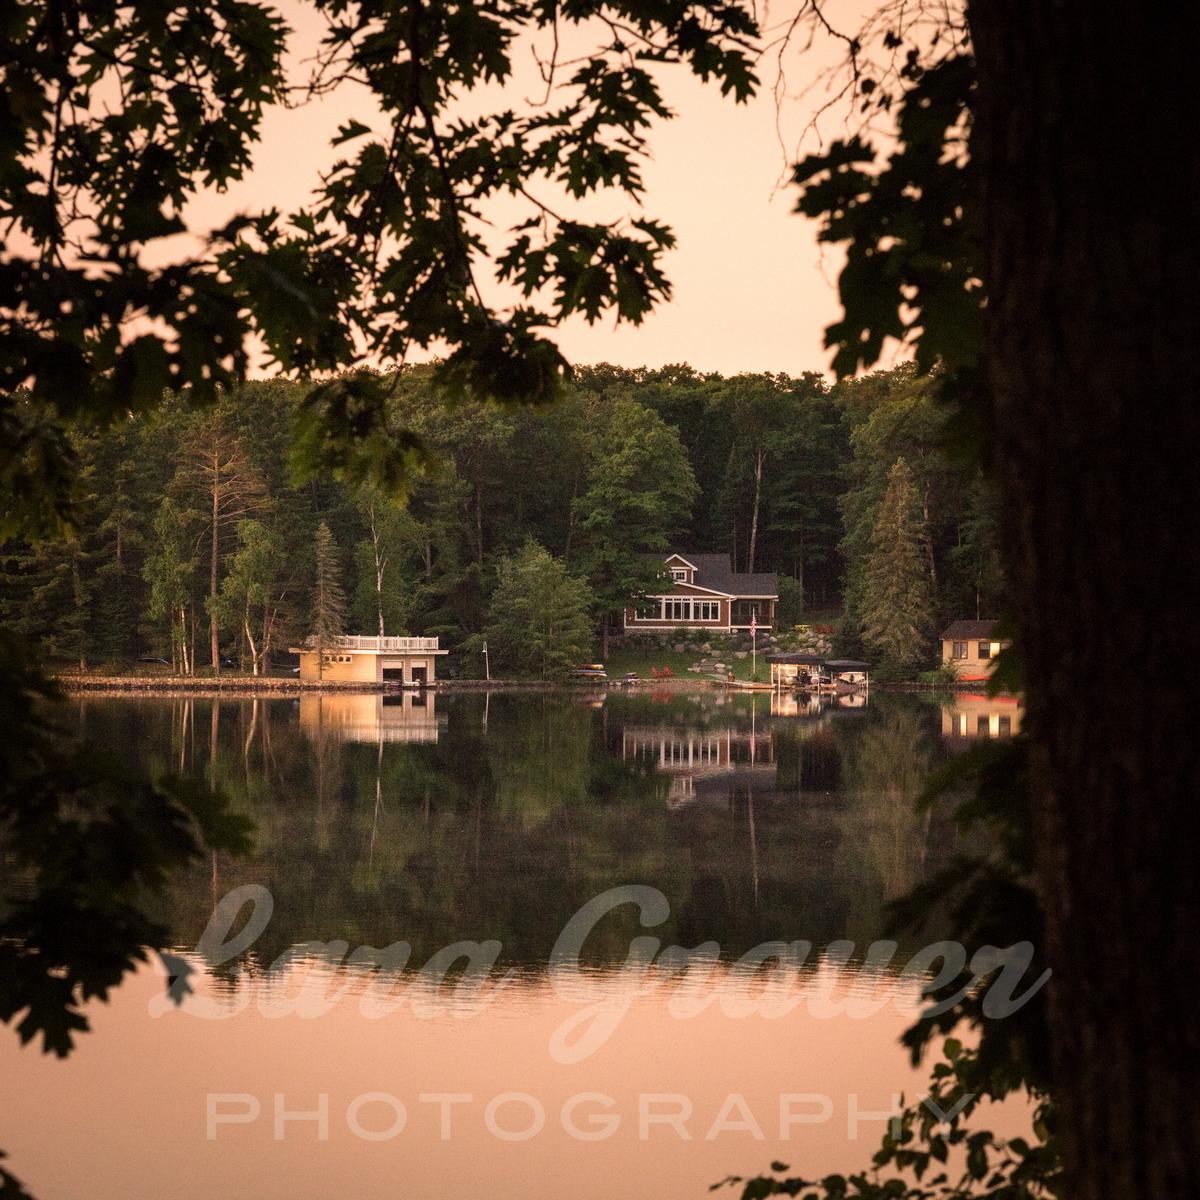 brown home on the side of the lake with the lara grauer photography logo